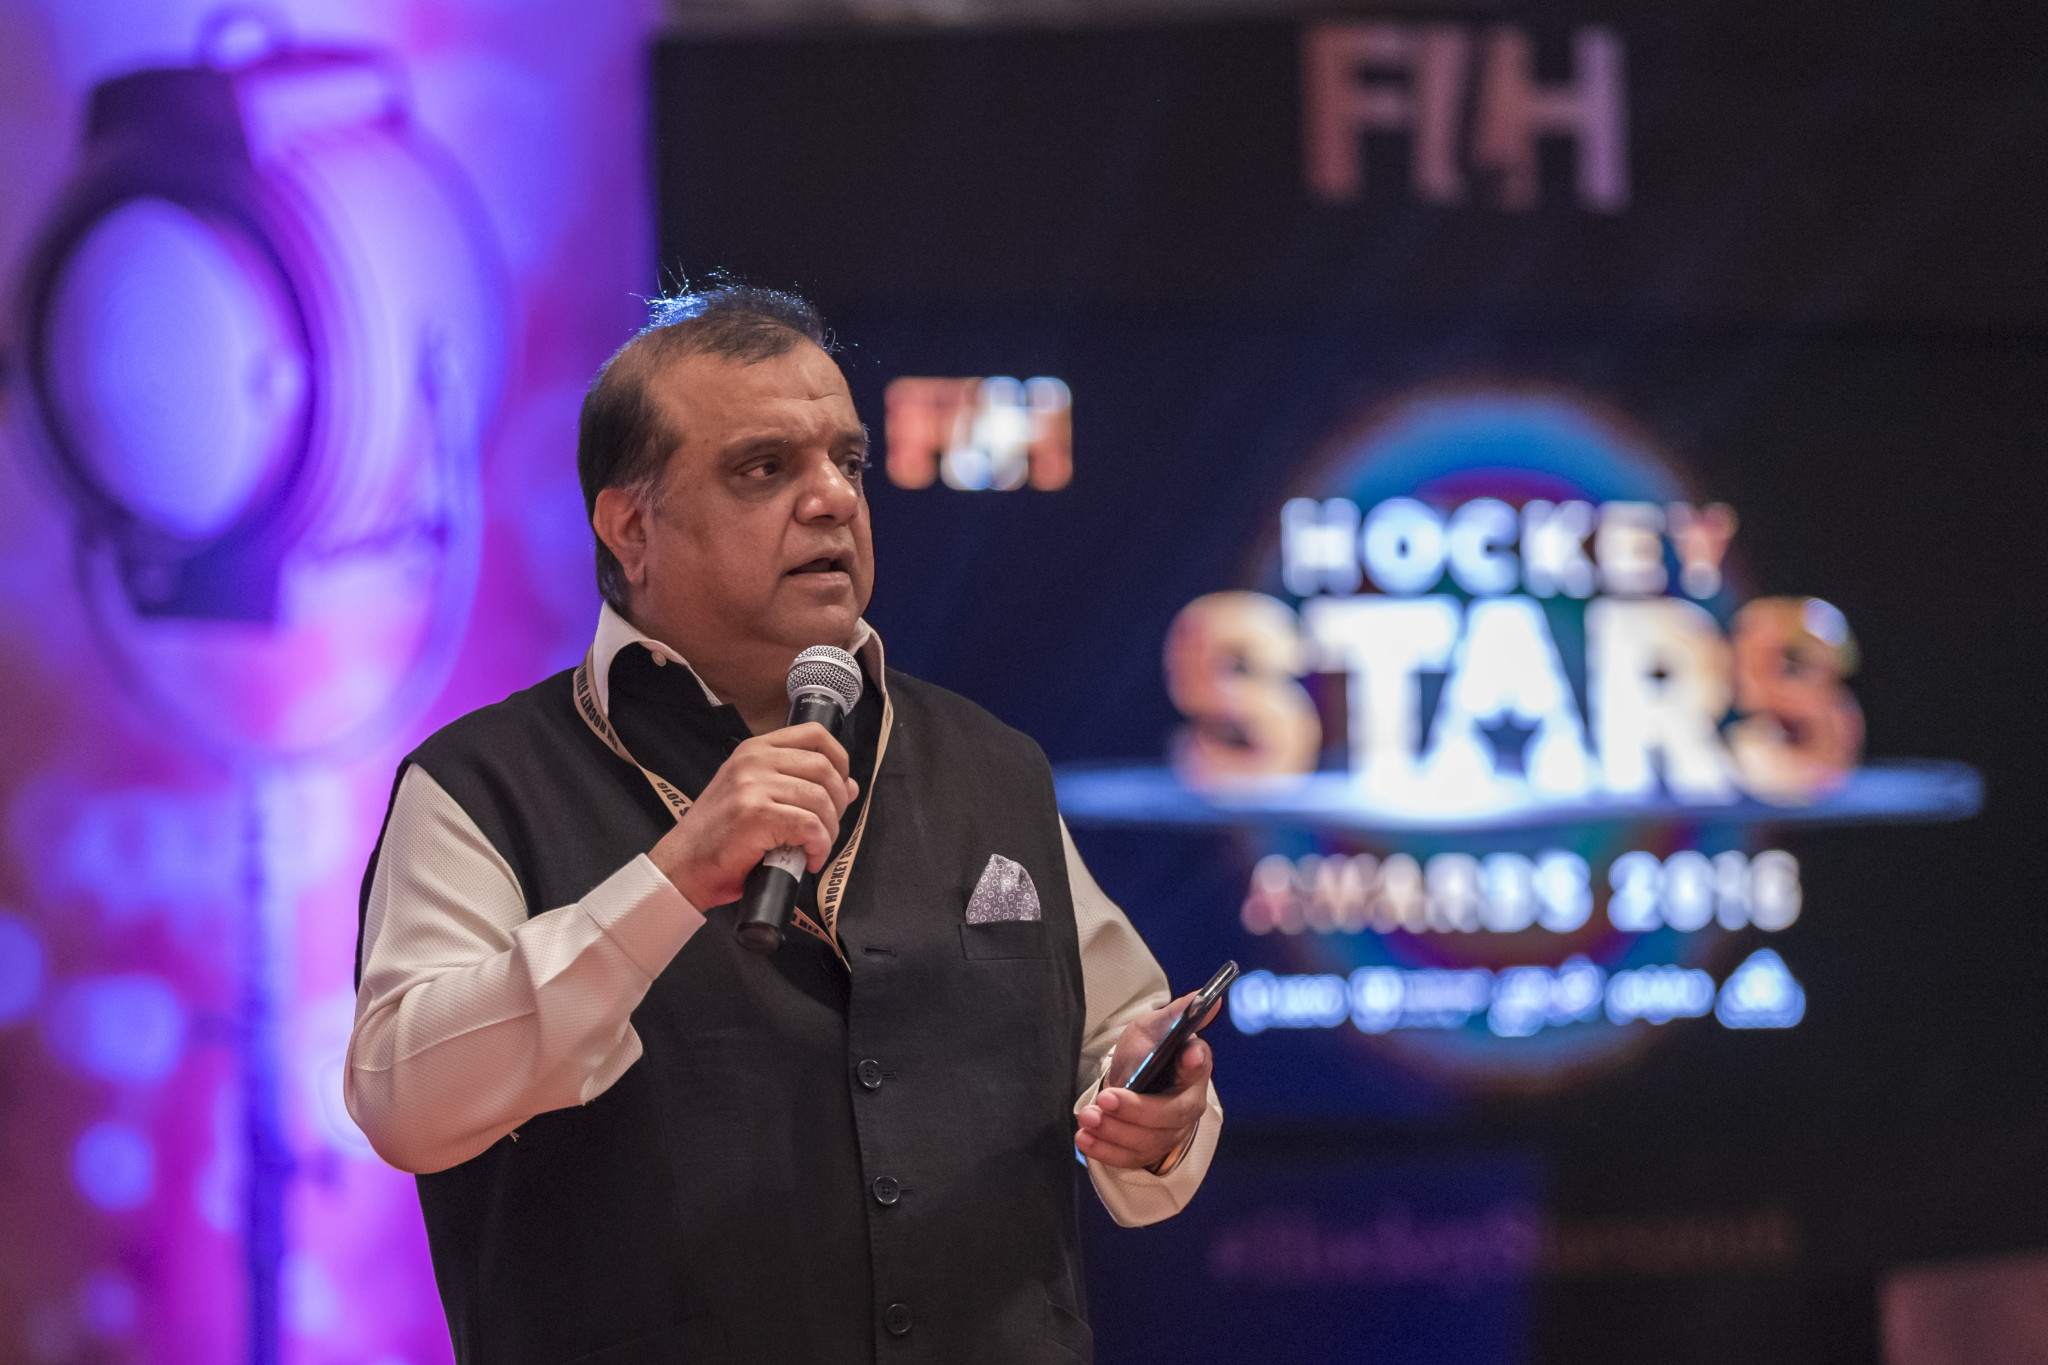 Indian Olympic Association President Narinder Batra has promised AGM will have the final say on a possible boycott of Birmingham 2022 in protest at the exclusion of shooting ©Getty Images